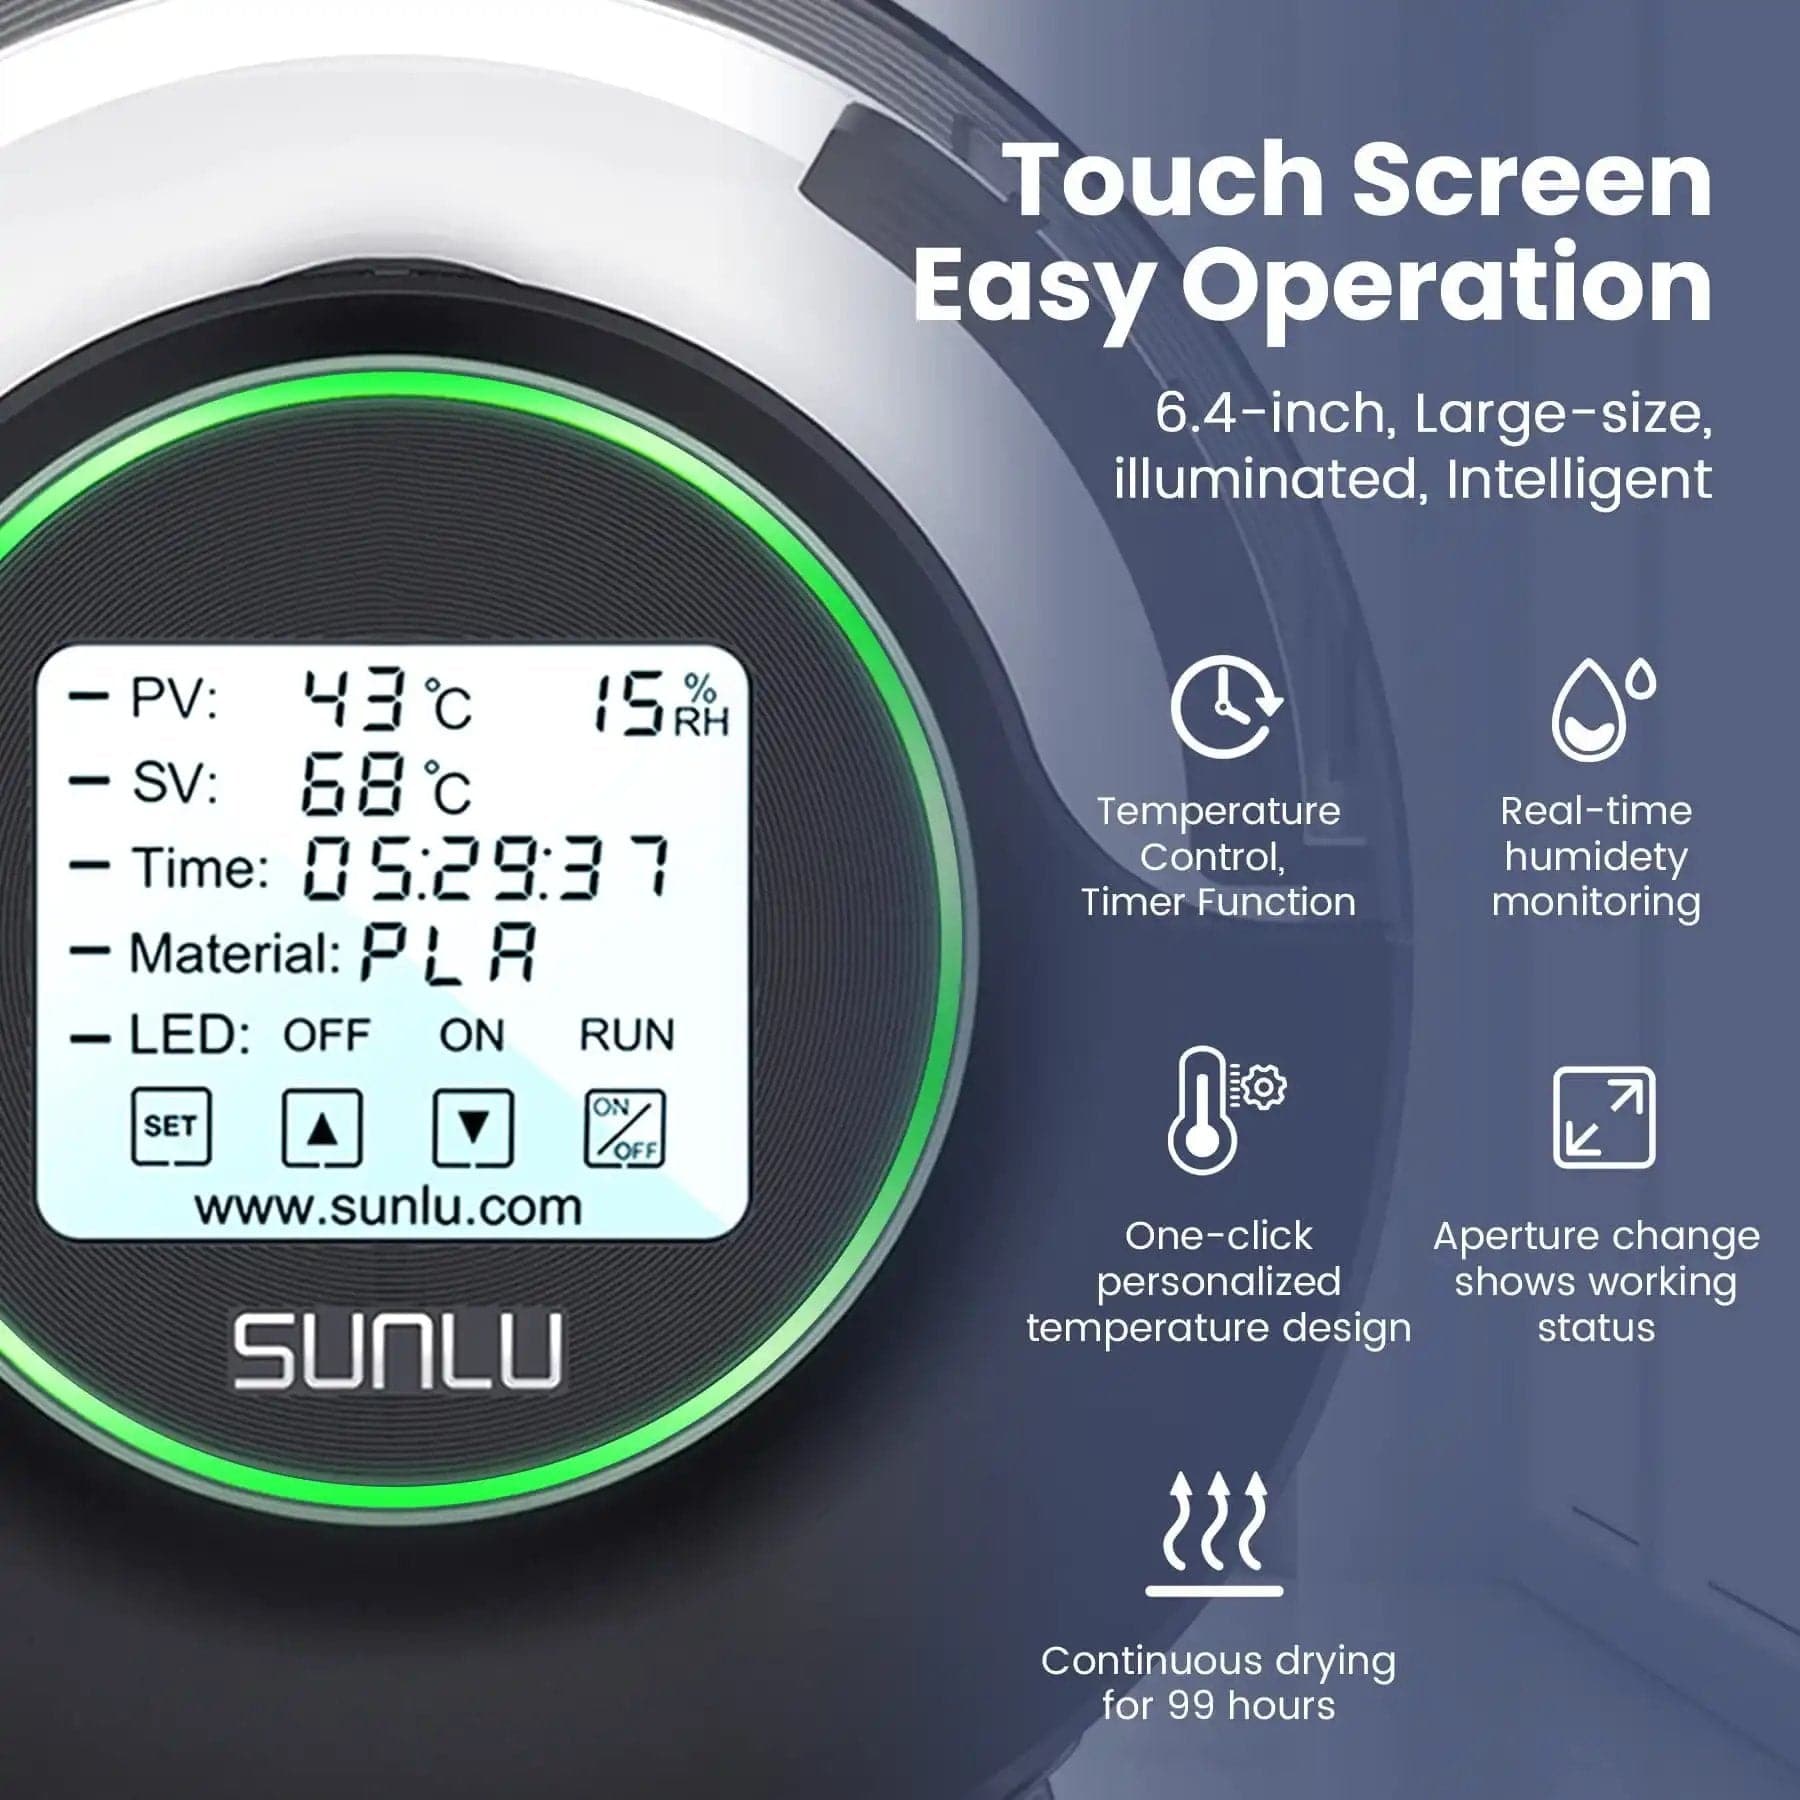 SUNLU Filament Dryer Box S2Features:


💝Same shipping service with Amazon. Enjoy reliable performance and fast shipping with the Amazon FBA Warehouse.


💝4.6" Touch Screen for Real-Time MoniSUNLU Filament Dryer Box S2Filament Dryer